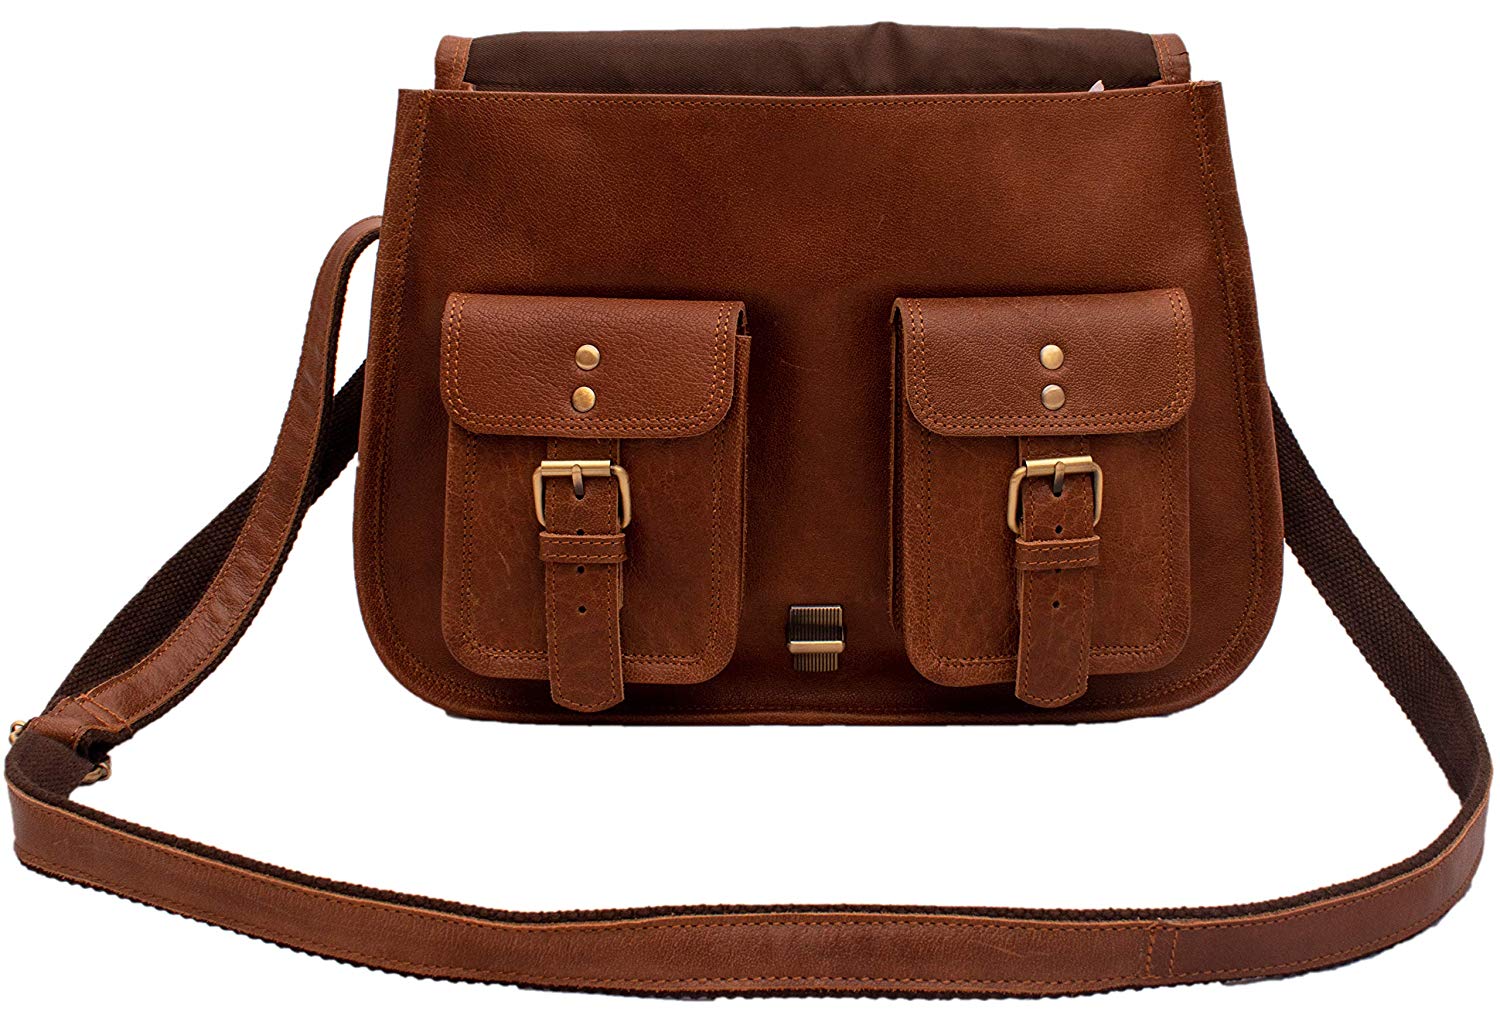 Real Leather Shoulder Bag Crossbody Satchel Bags Woman – VacationGrabs